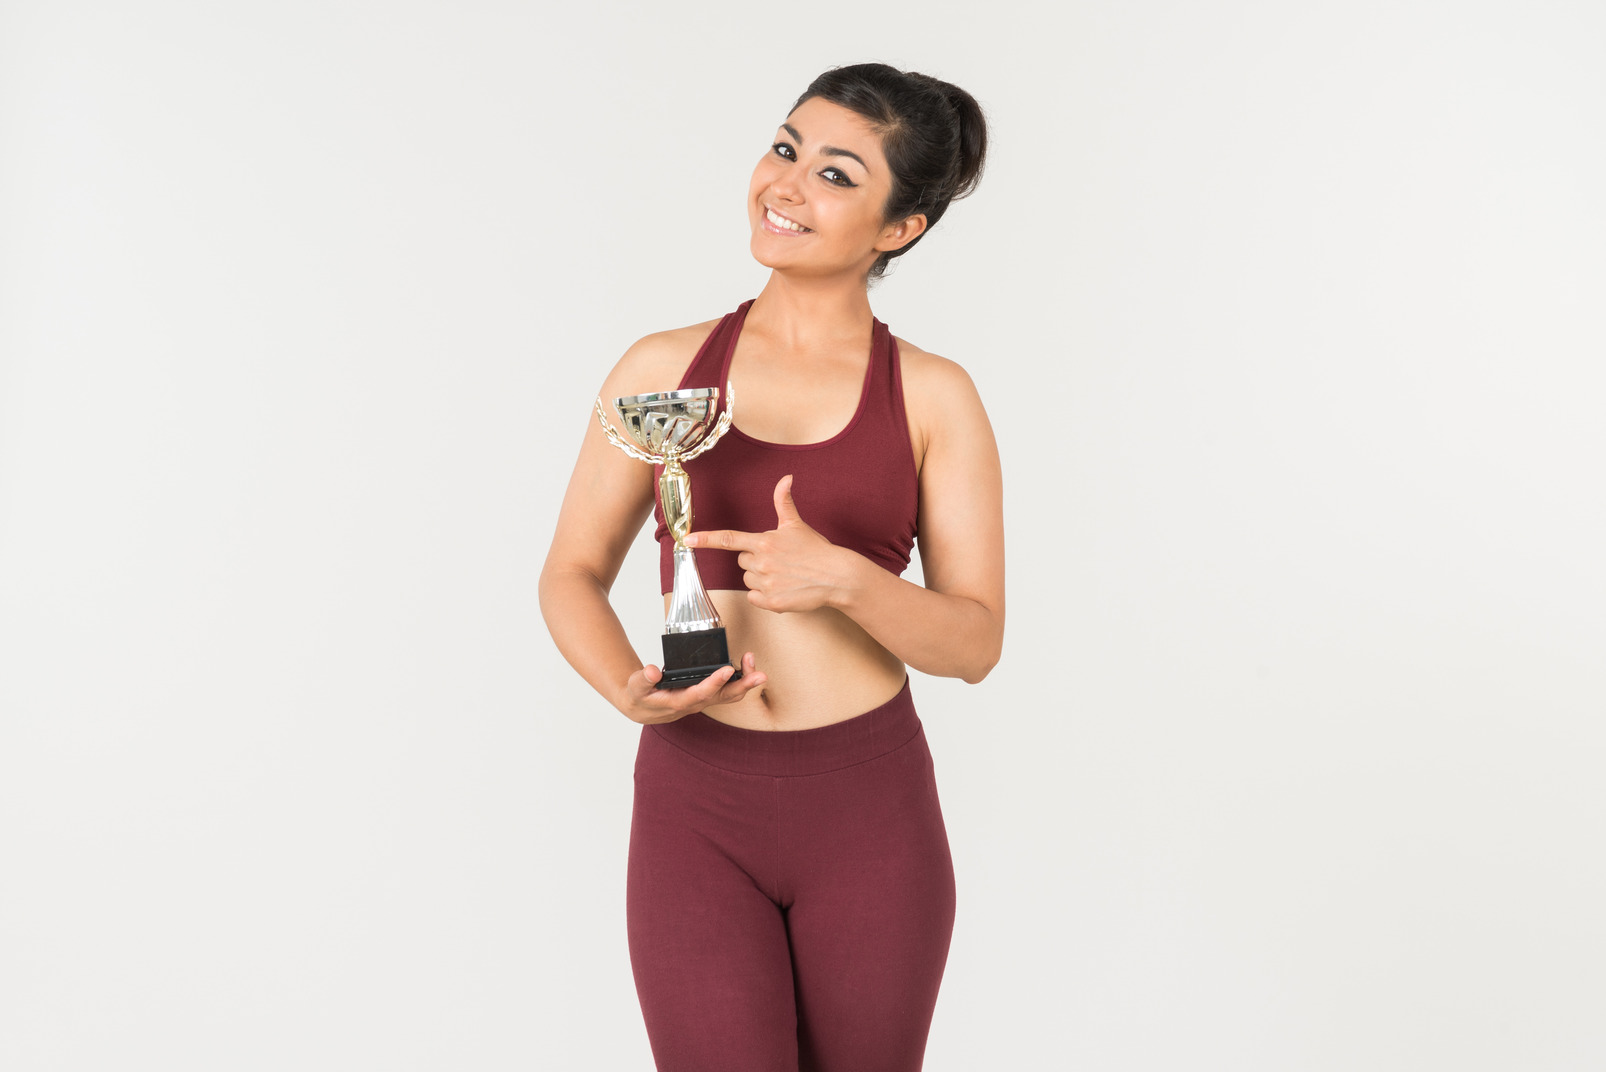 Young indian woman in sporstwear pointing at award she's holding